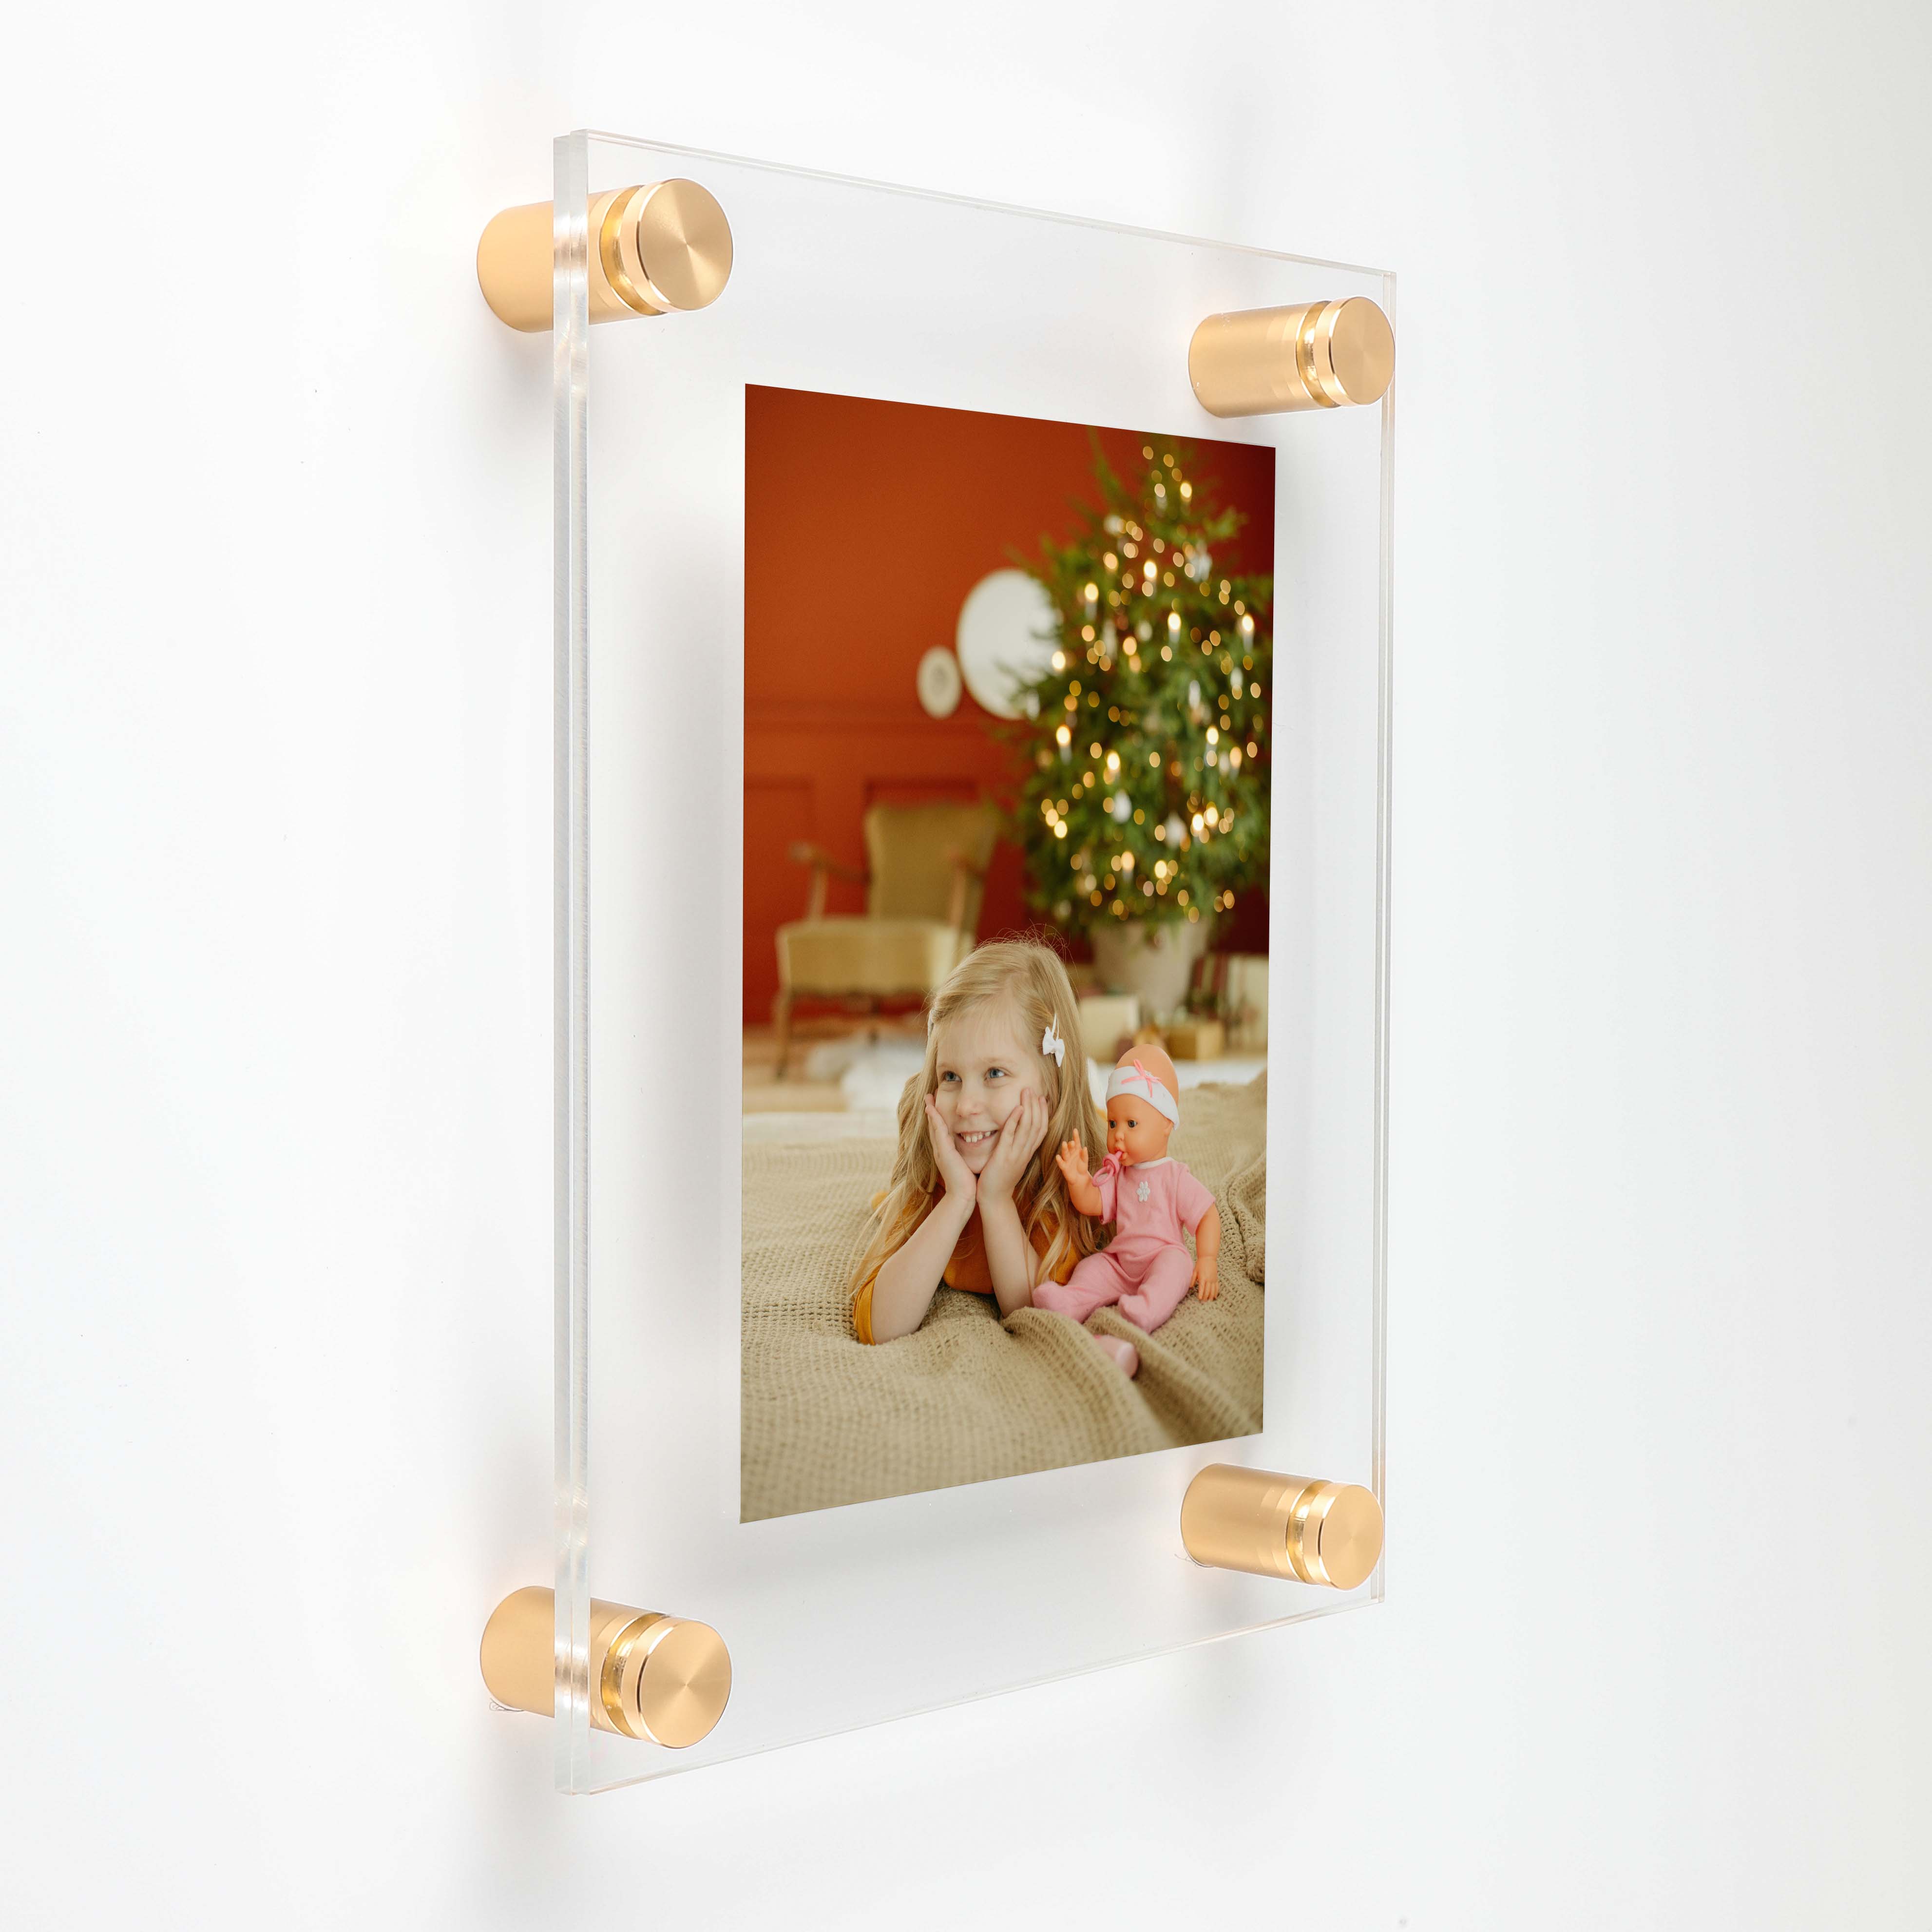 (2) 13-1/2'' x 16-1/2'' Clear Acrylics , Pre-Drilled With Polished Edges (Thick 1/8'' each), Wall Frame with (4) 3/4'' x 1/2'' Champagne Anodized Aluminum Standoffs includes Screws and Anchors